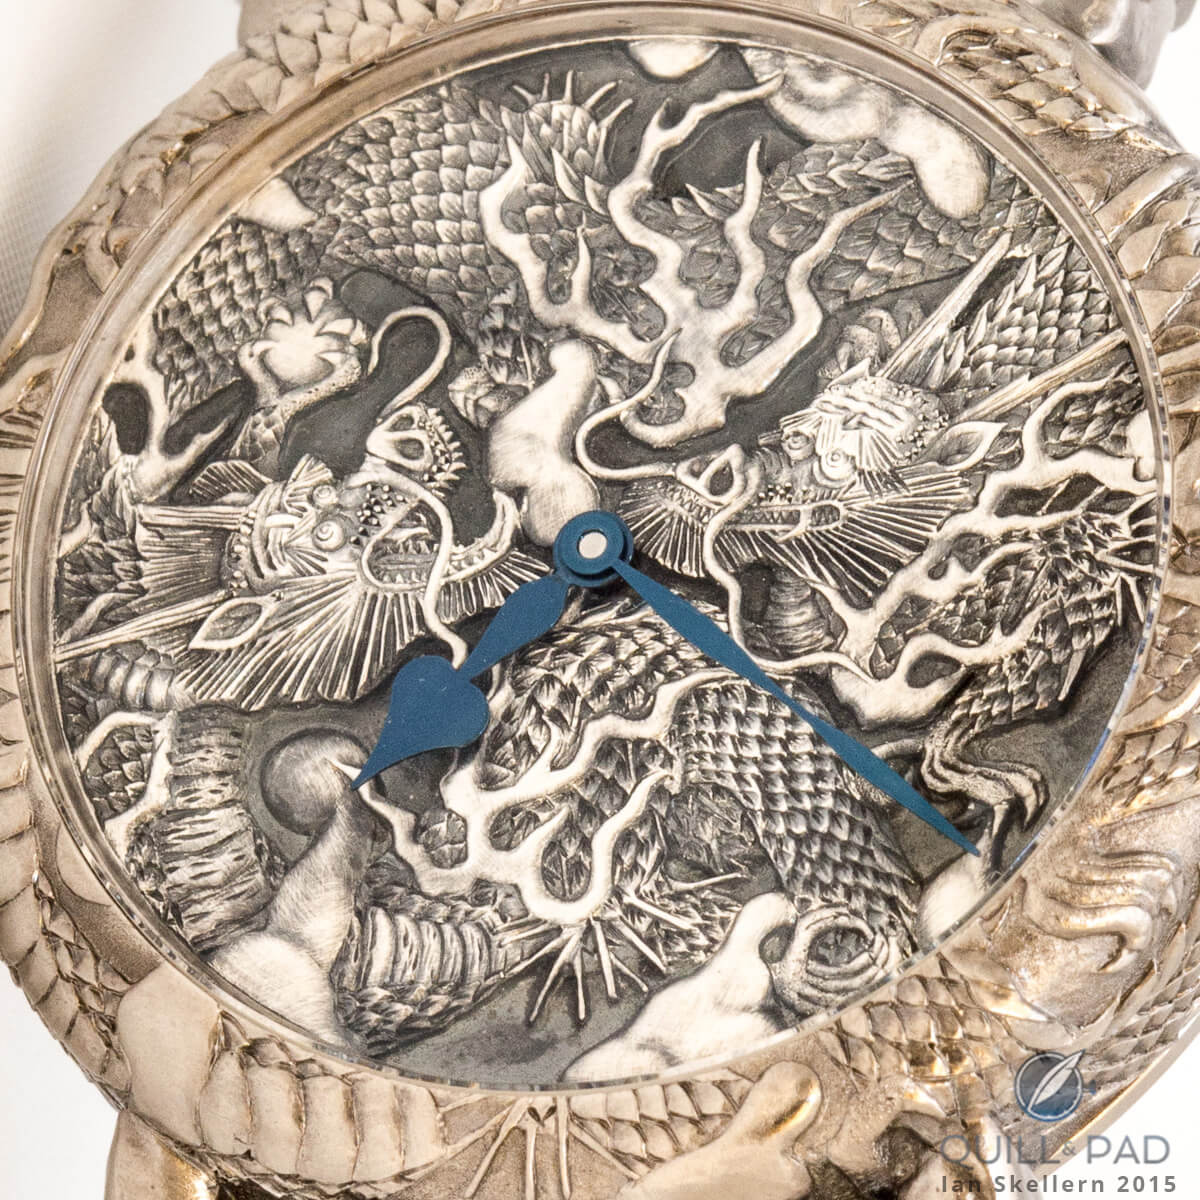 A close-up look at the intricately engraved dial of the Speake-Marin Kennin-ji Temple Masters Project